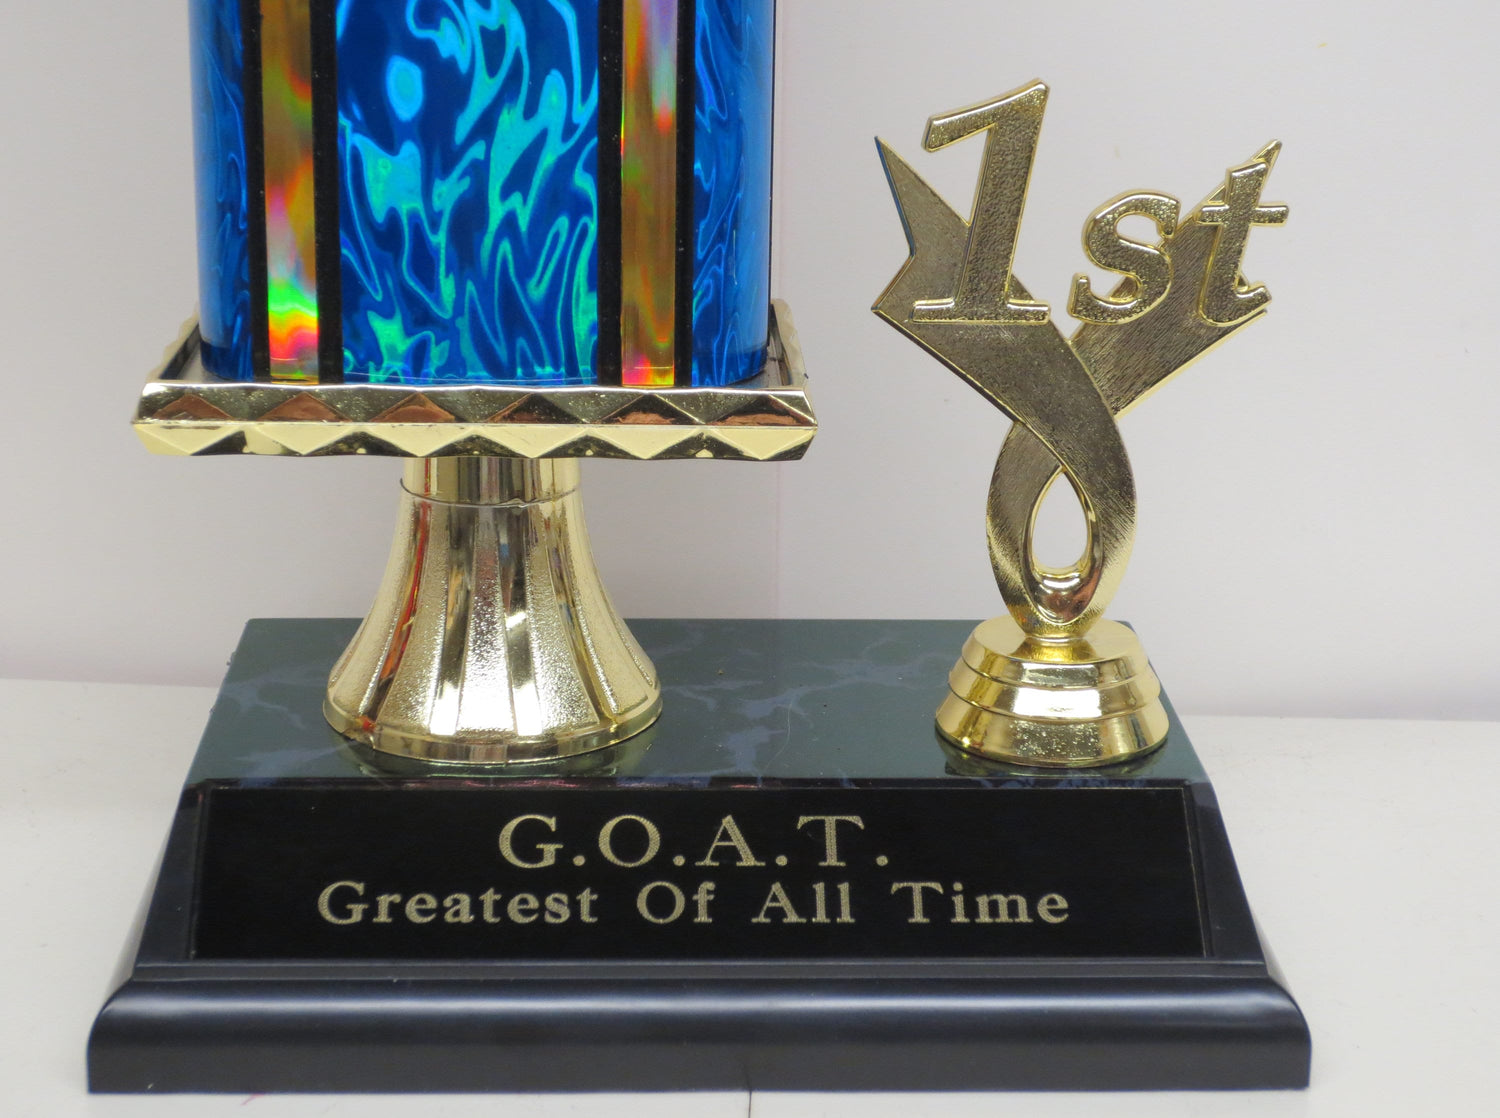 GOAT Trophy Greatest of All Time Award Trophy Hand Painted Funny Trophy Top Sales Motivational Achievement Award Personalized Winner